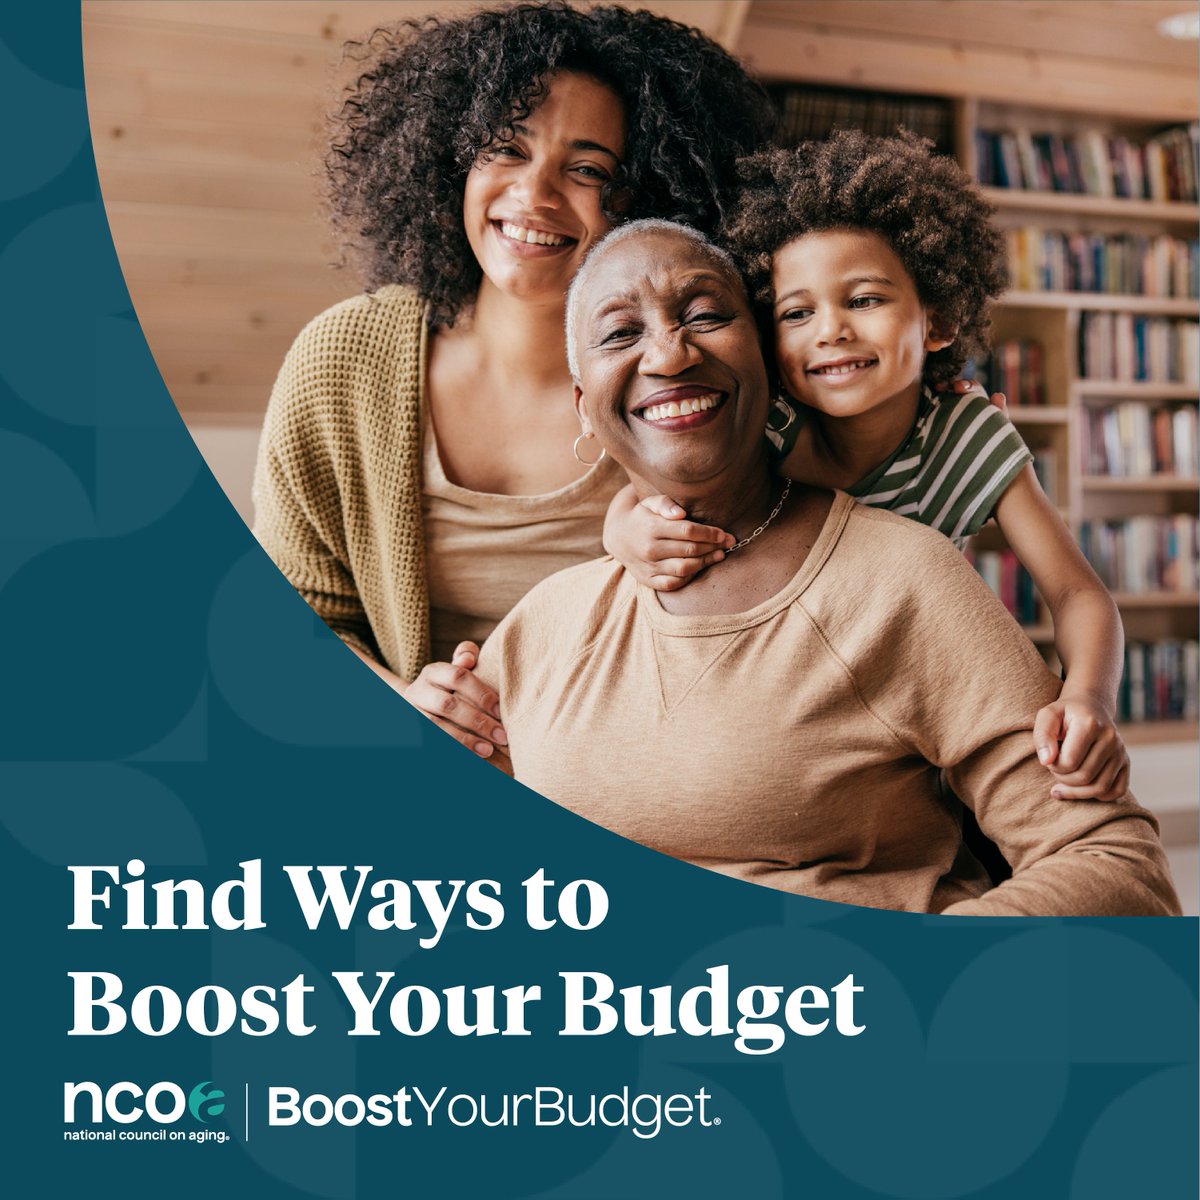 Finding financial stability can feel like a scramble. #BoostYourBudgetWeek is a good reminder that you can get a free, individualized look at benefits that help you afford necessities. ncoa.org/Boost @NCOAging